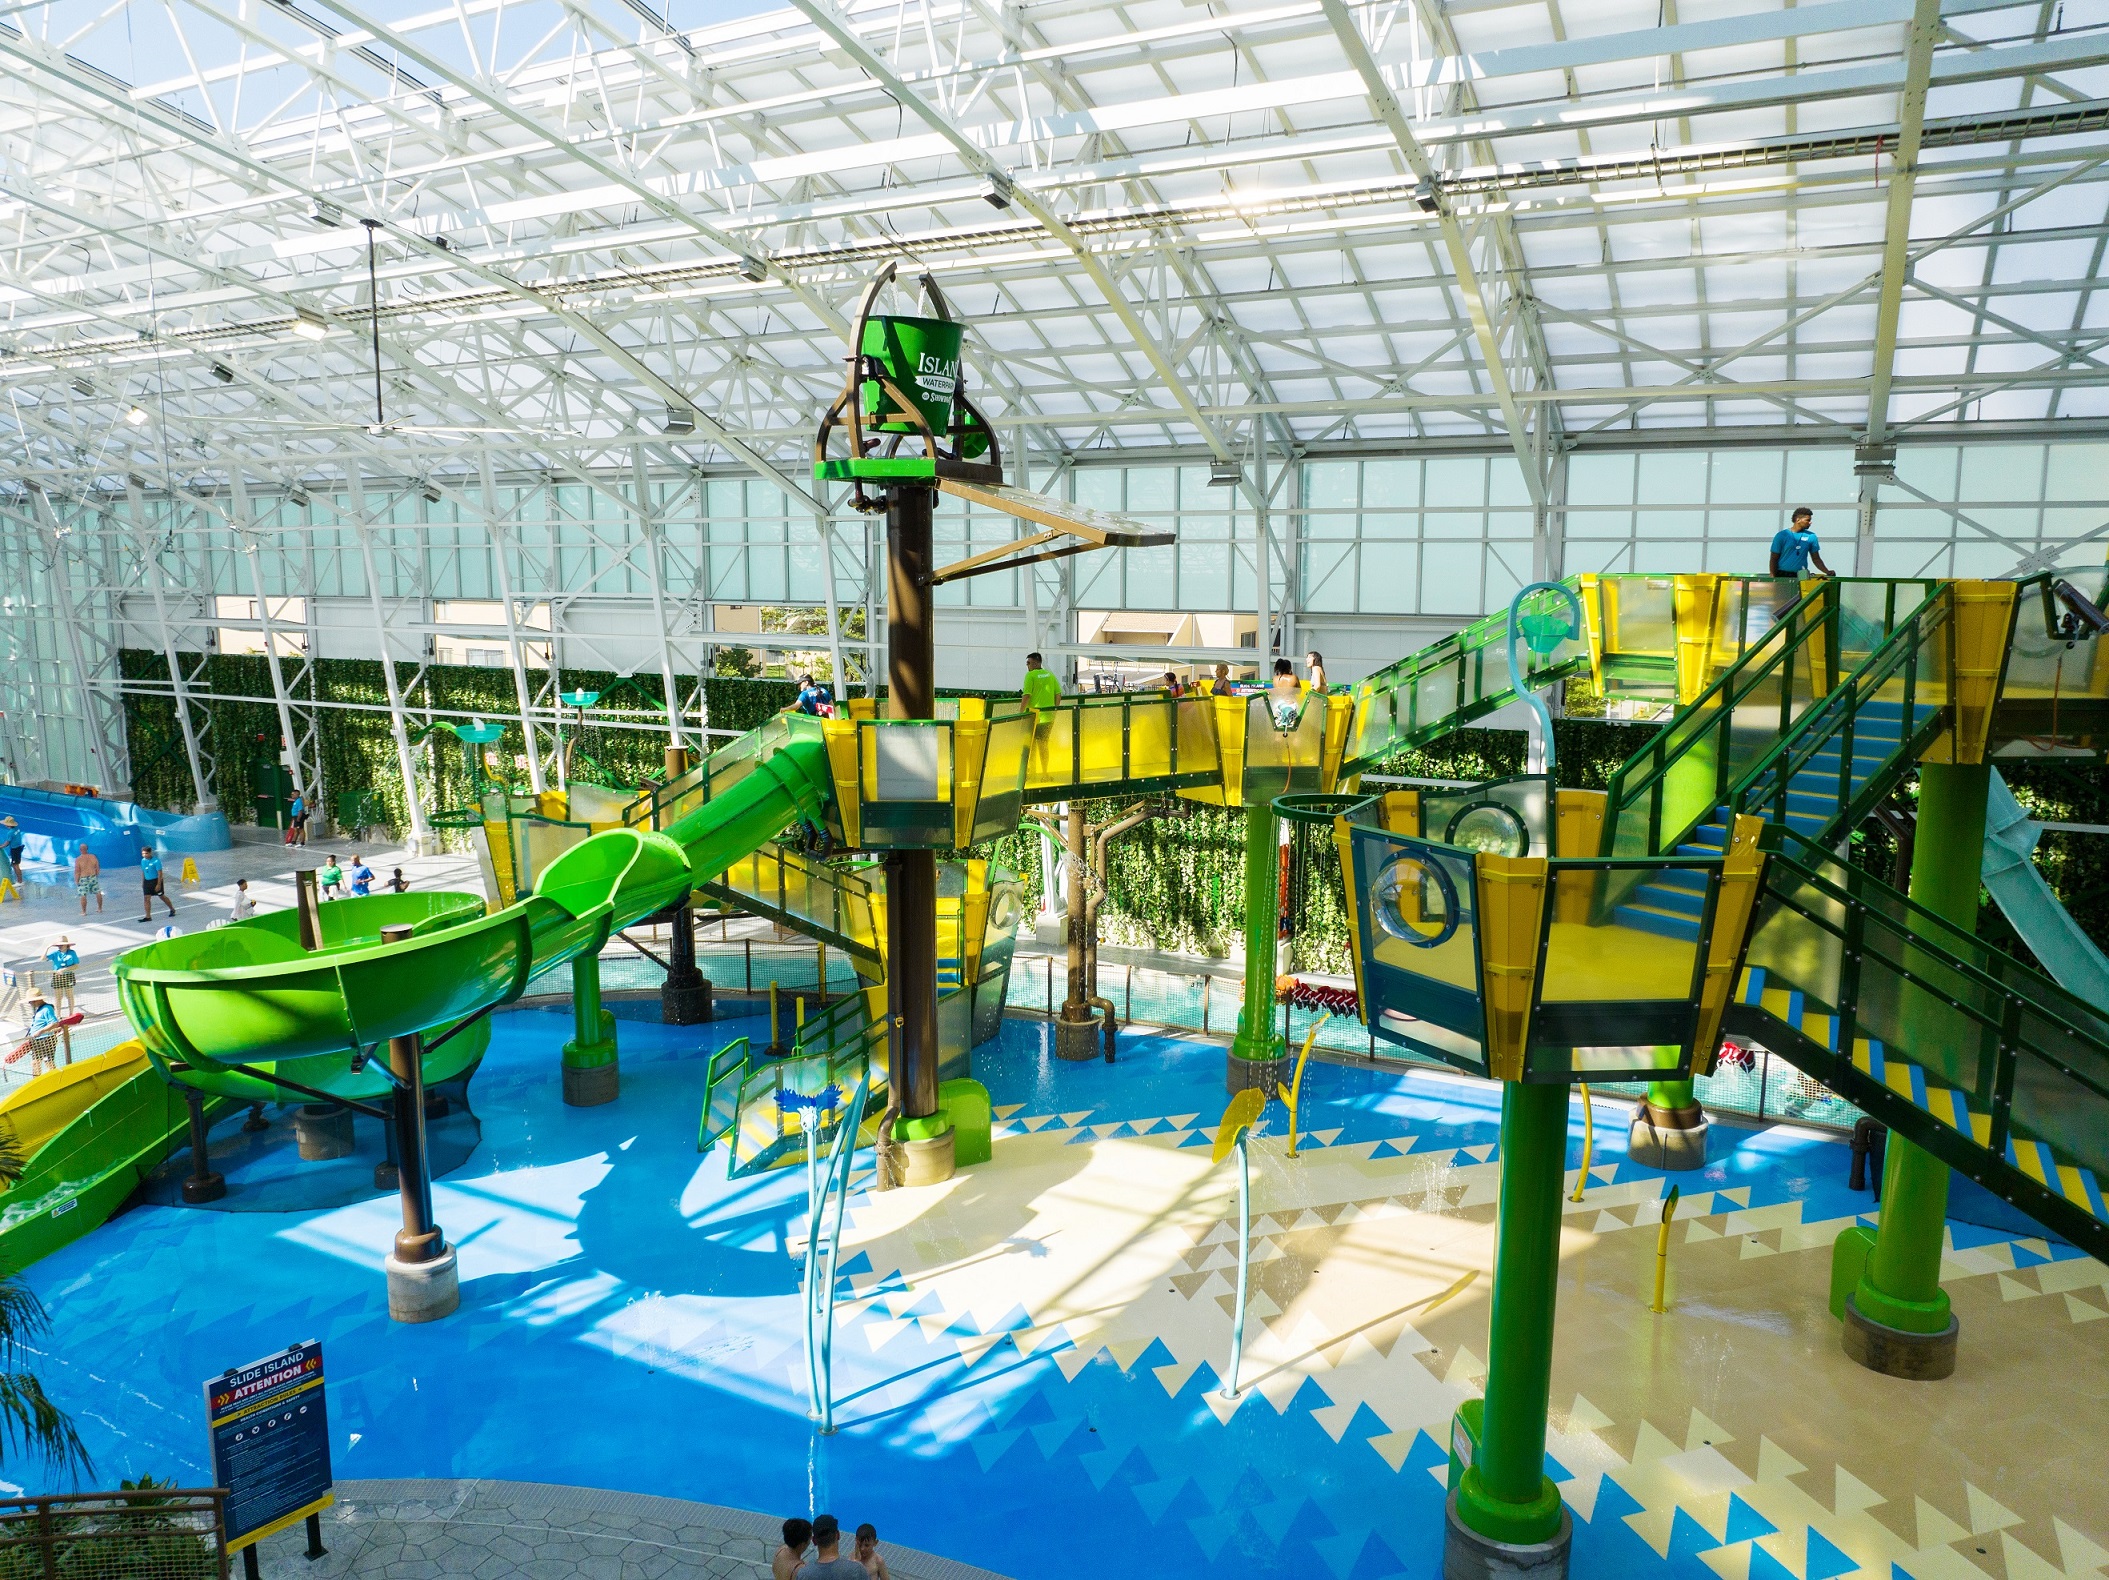 Green and yellow aquatic play structure